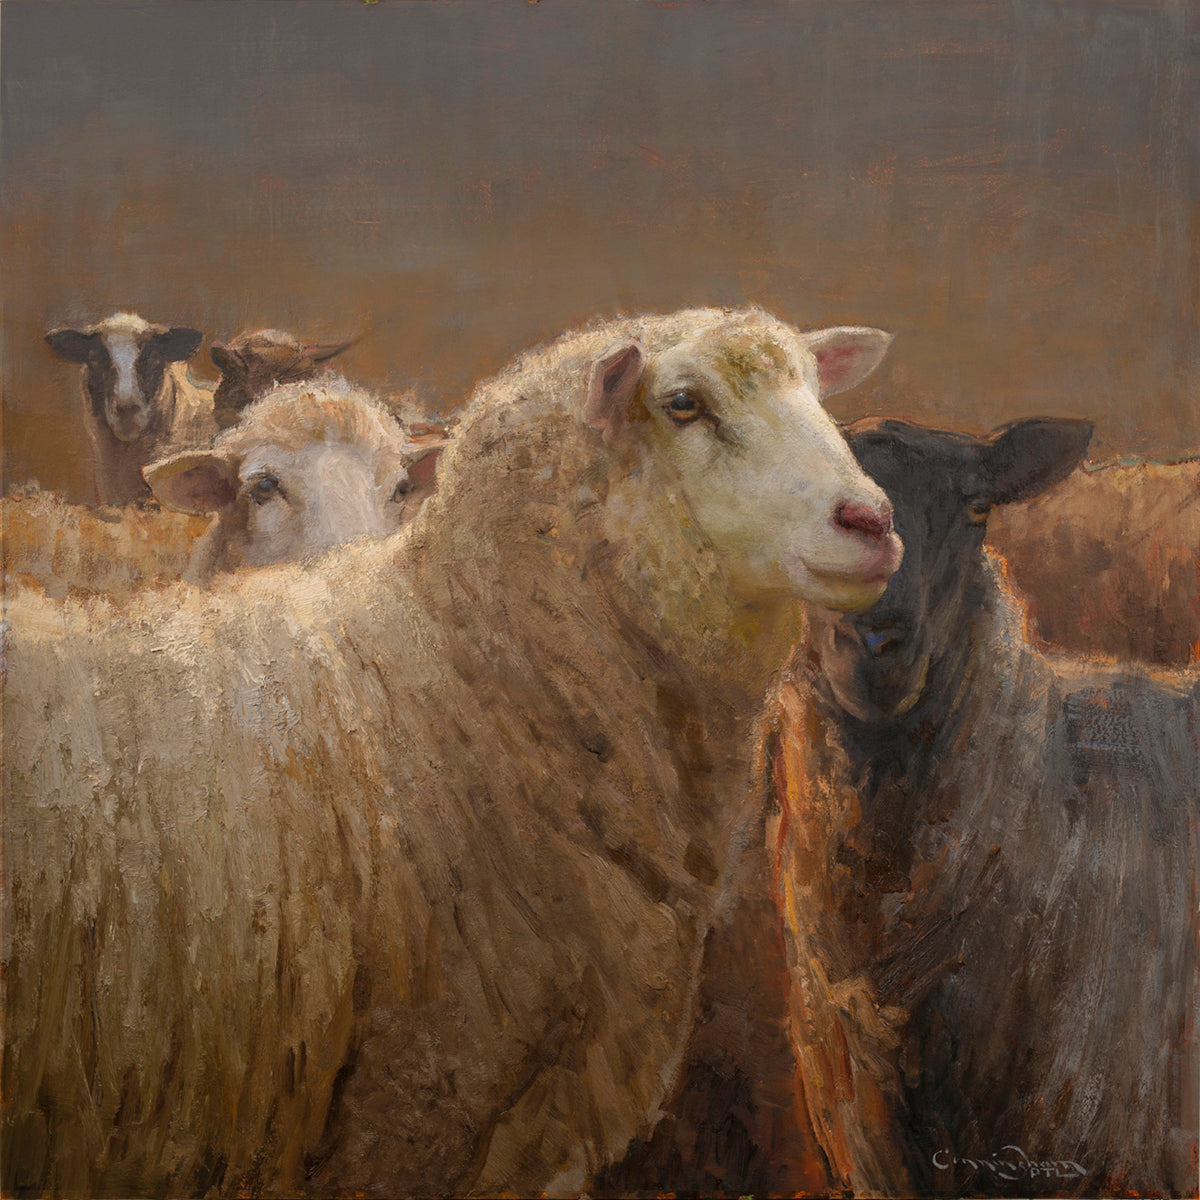 Penelope and Company, 36x36 inches